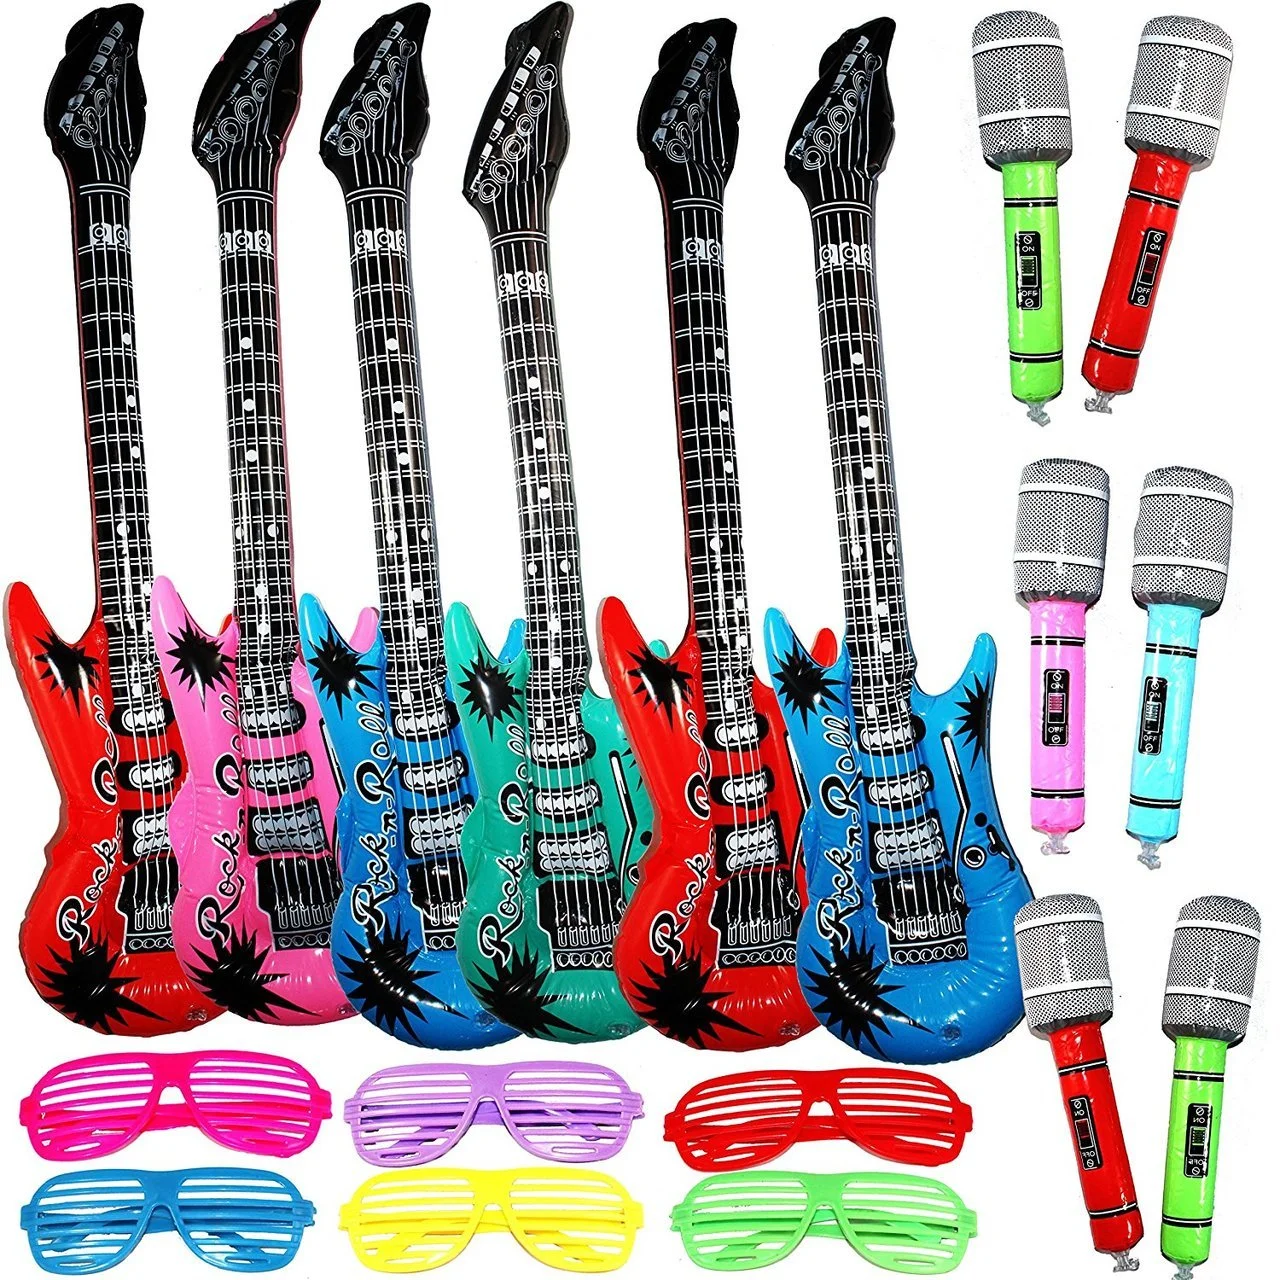 12-piece Set Inflatable Rockstar Party Pack